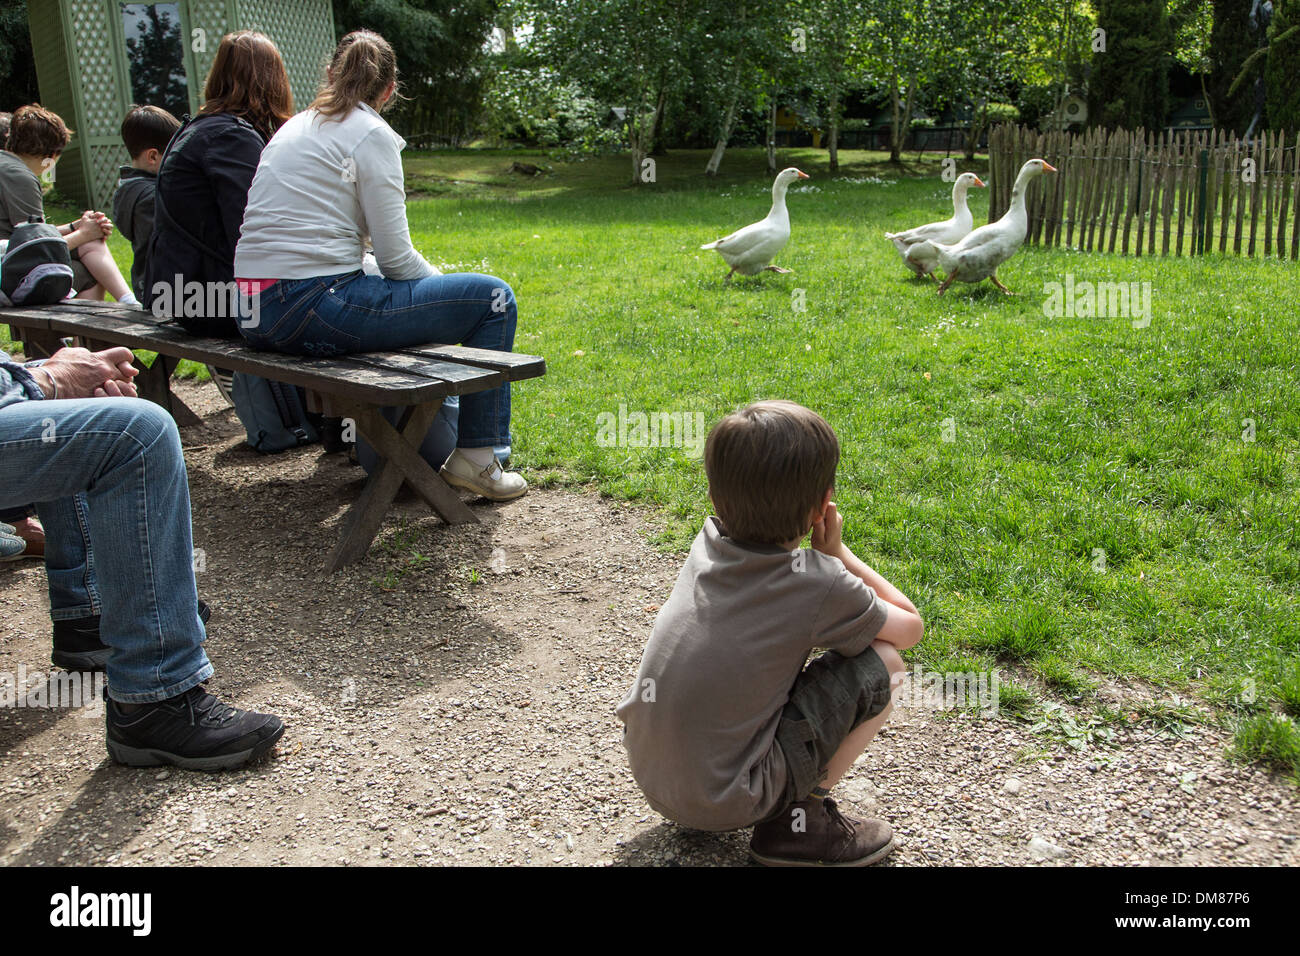 GEESE IN THE OLD-FASHIONED FARMYARD, FAMILY VISITING THE FARMYARD MUSEUM AT THE POTAGER DES PRINCES, CHANTILLY, OISE (60), FRANCE Stock Photo